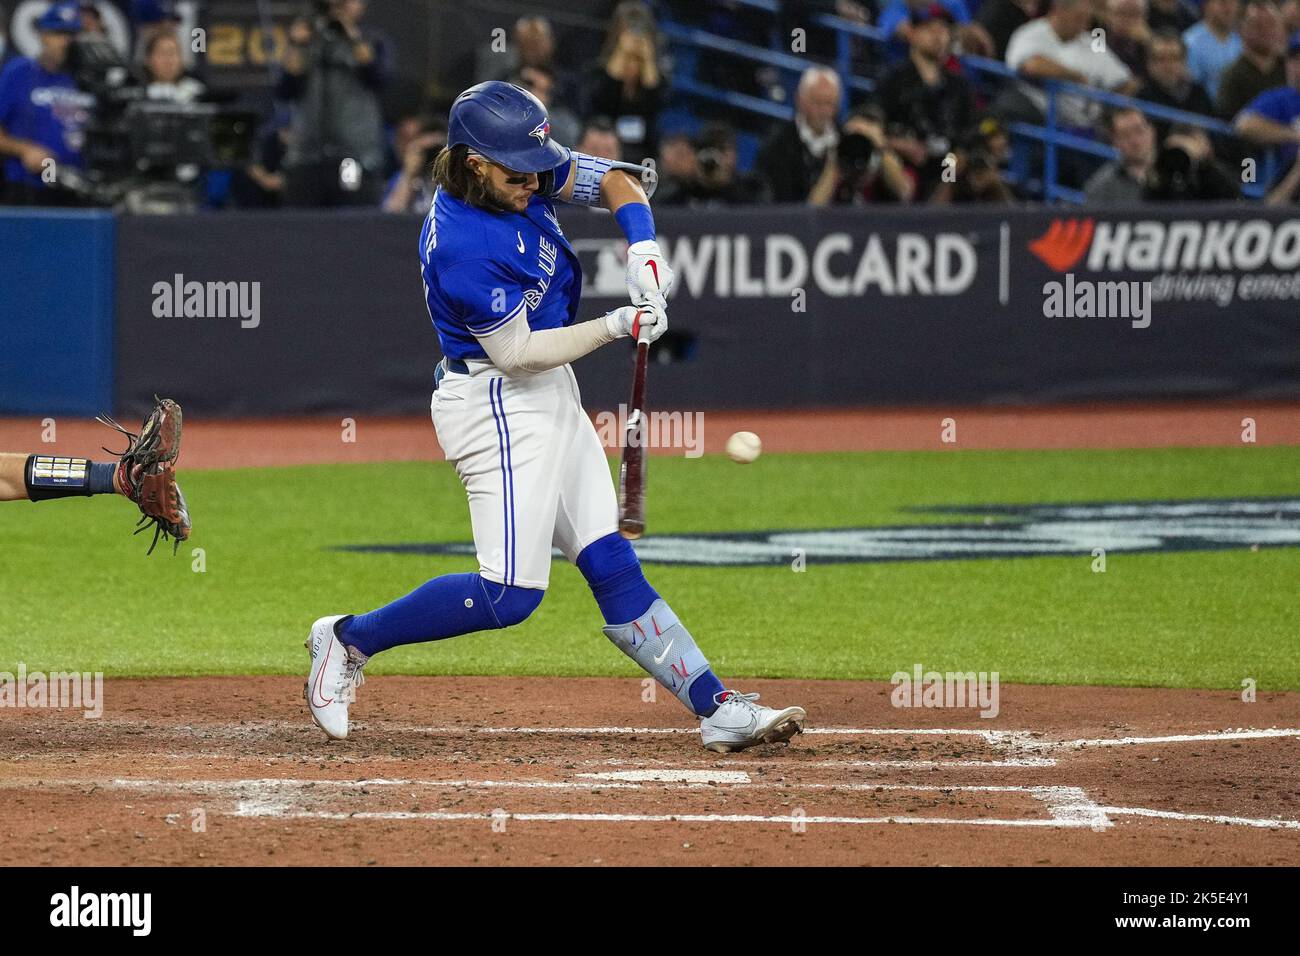 American League All-Star Bo Bichette of the Toronto Blue Jays and a  Photo d'actualité - Getty Images